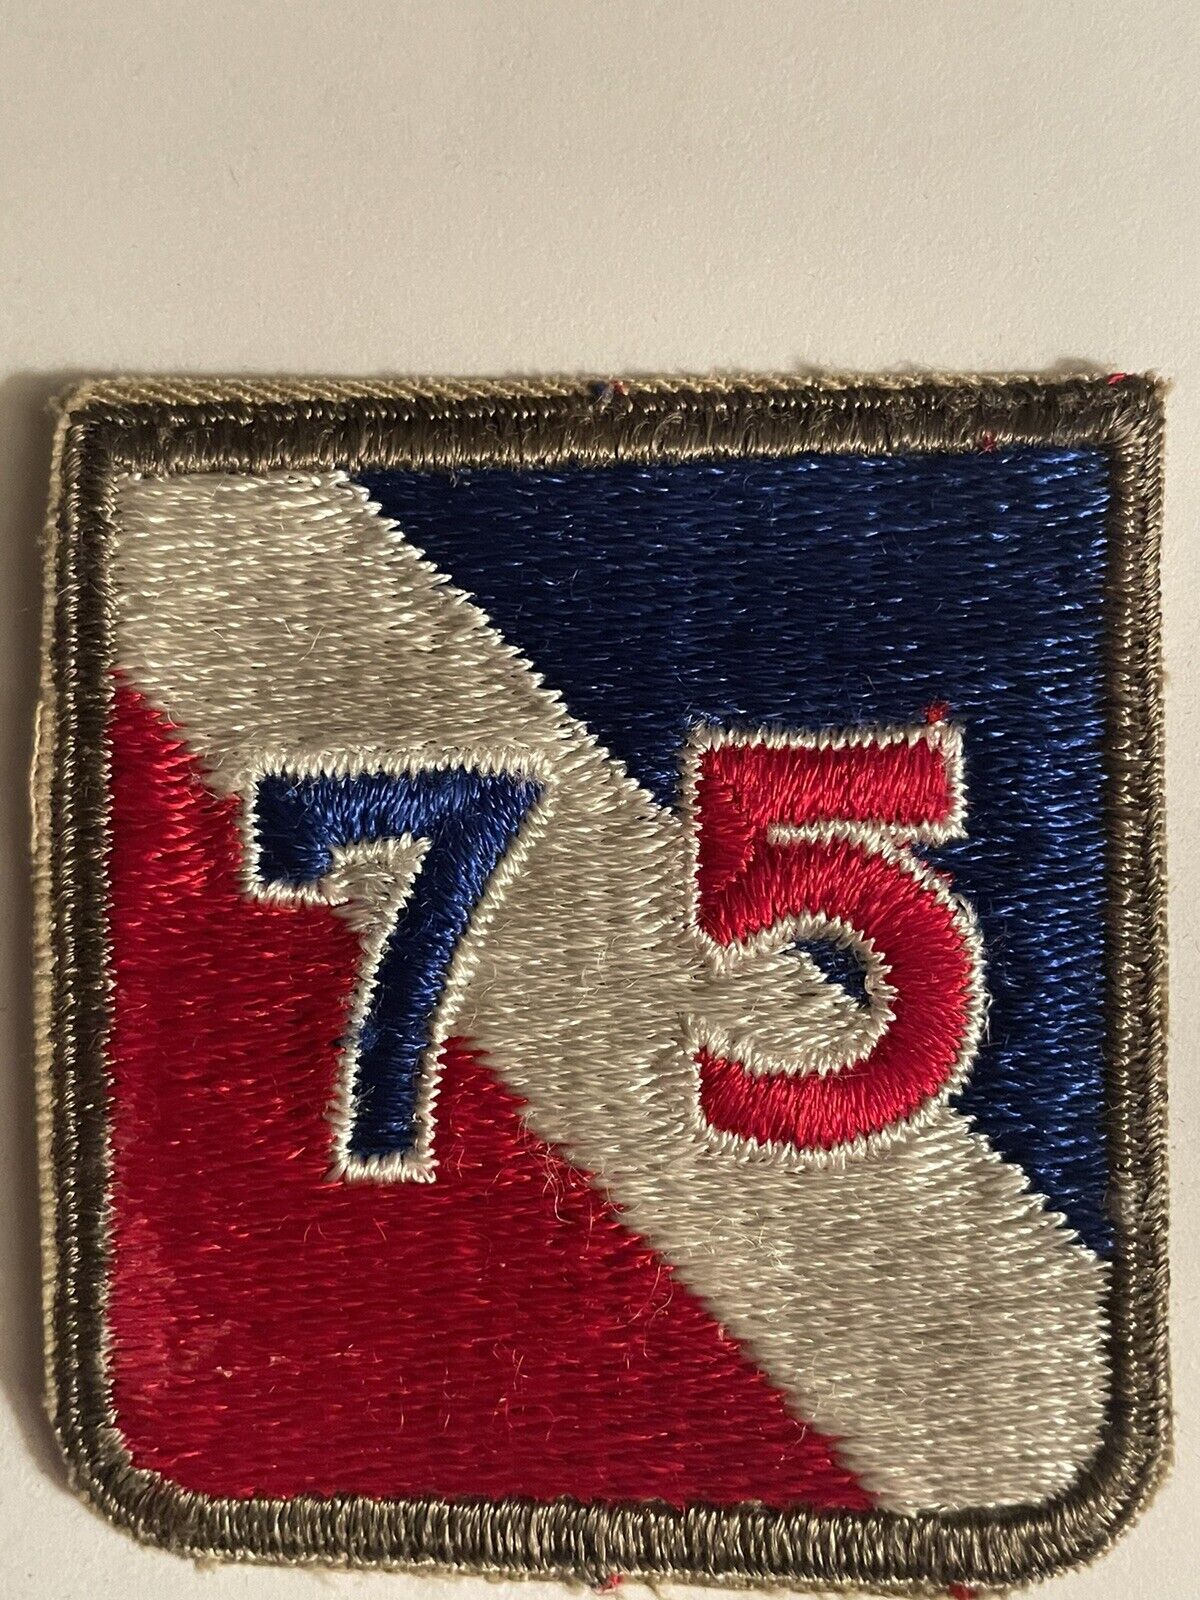 WW2 75th Infantry Division Patch(ID)